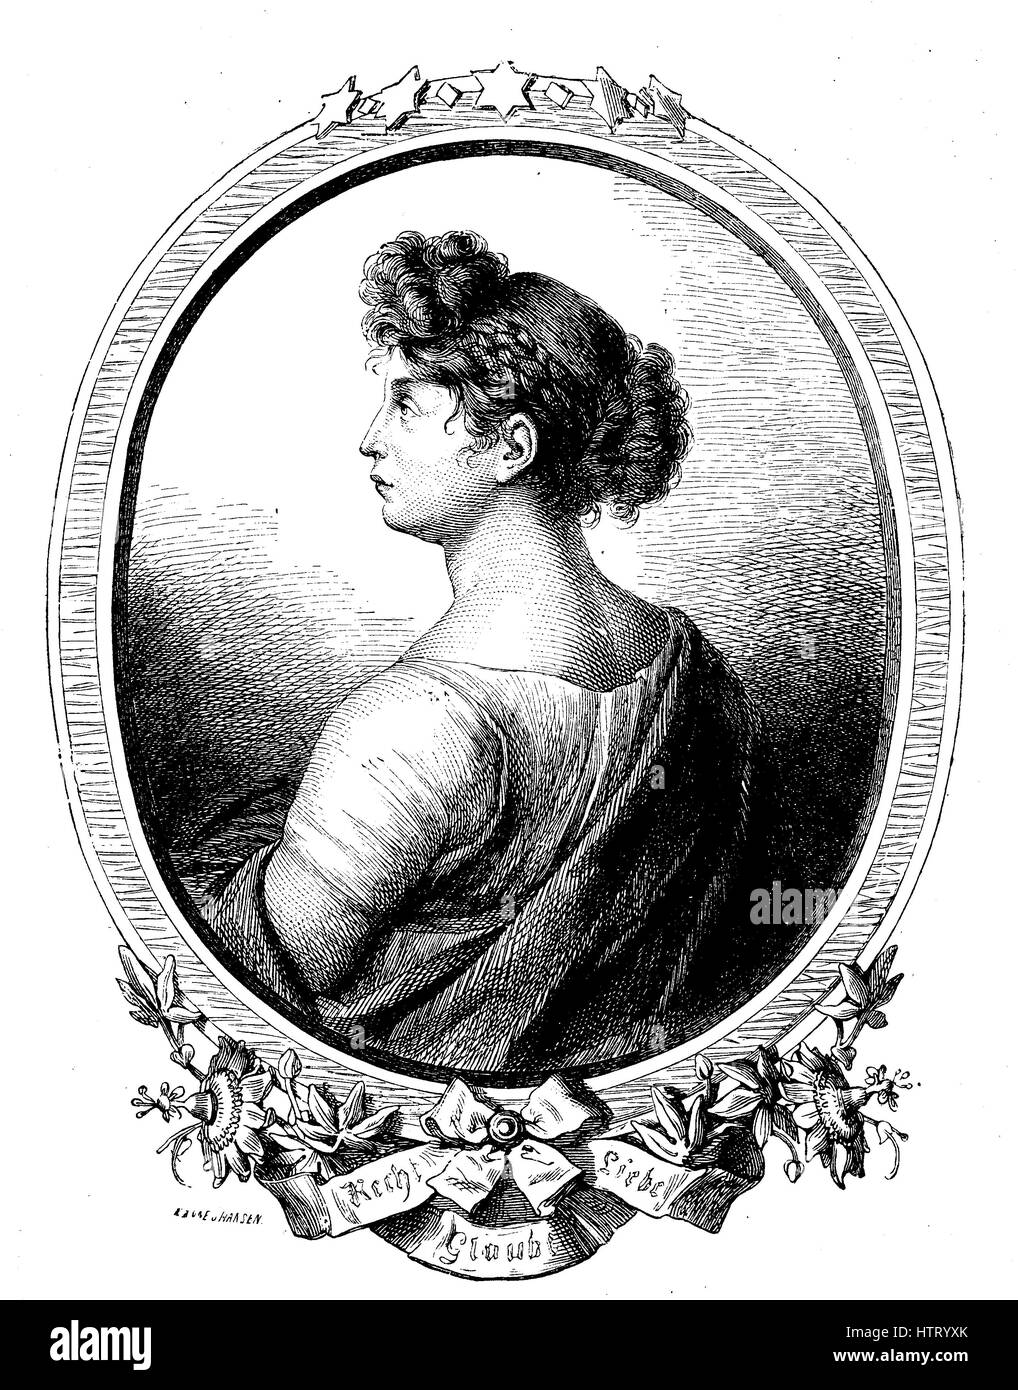 Duchess Louise of Mecklenburg-Strelitz, Luise Auguste Wilhelmine Amalie, 10 March 1776 - 19 July 1810, reproduction of a woodcut from the year 1880, digital improved Stock Photo